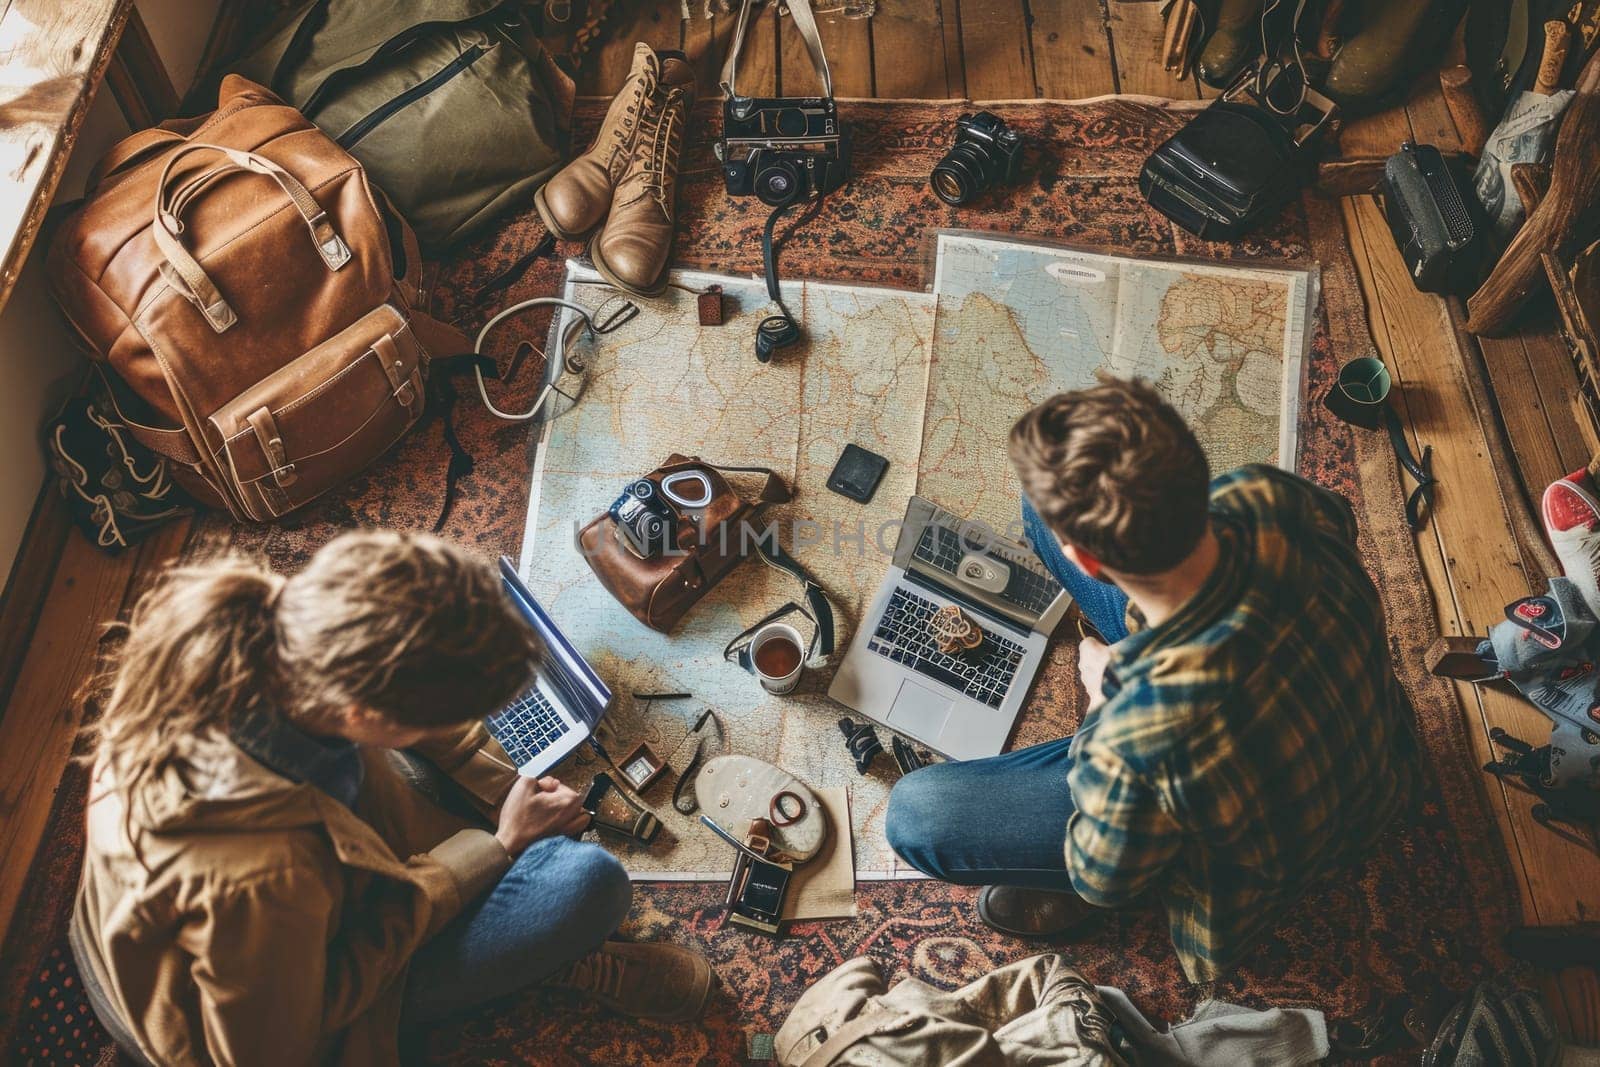 The picture of the couple young or adult caucasian human focus and looking at the map of the world in the small room that has been filled with various object under a bright sun in the daytime. AIGX03.